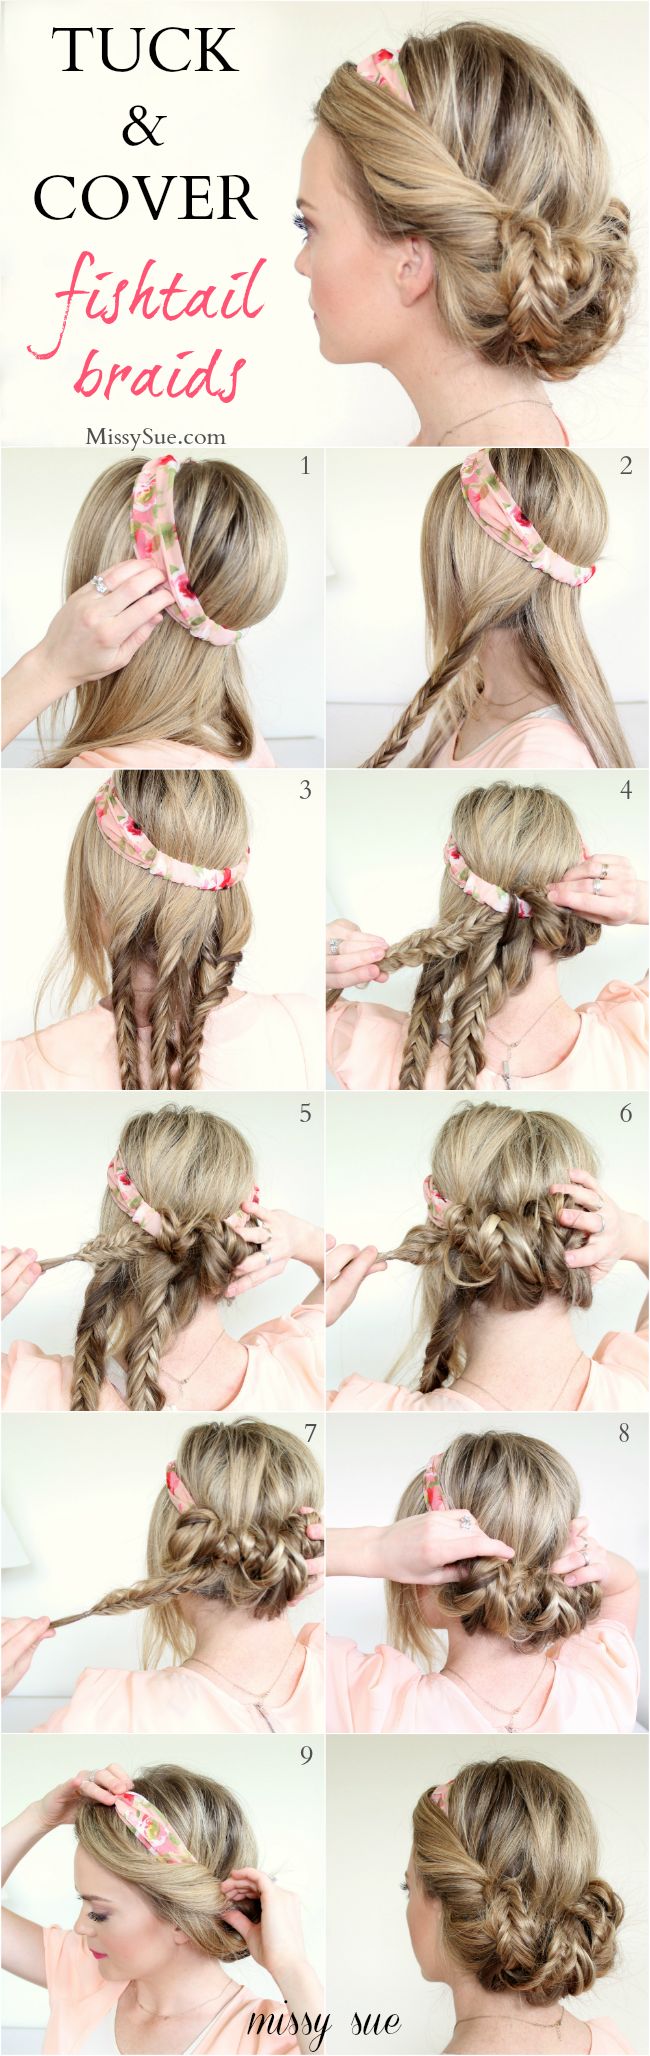 Tuck and Cover Fishtail Braids: 